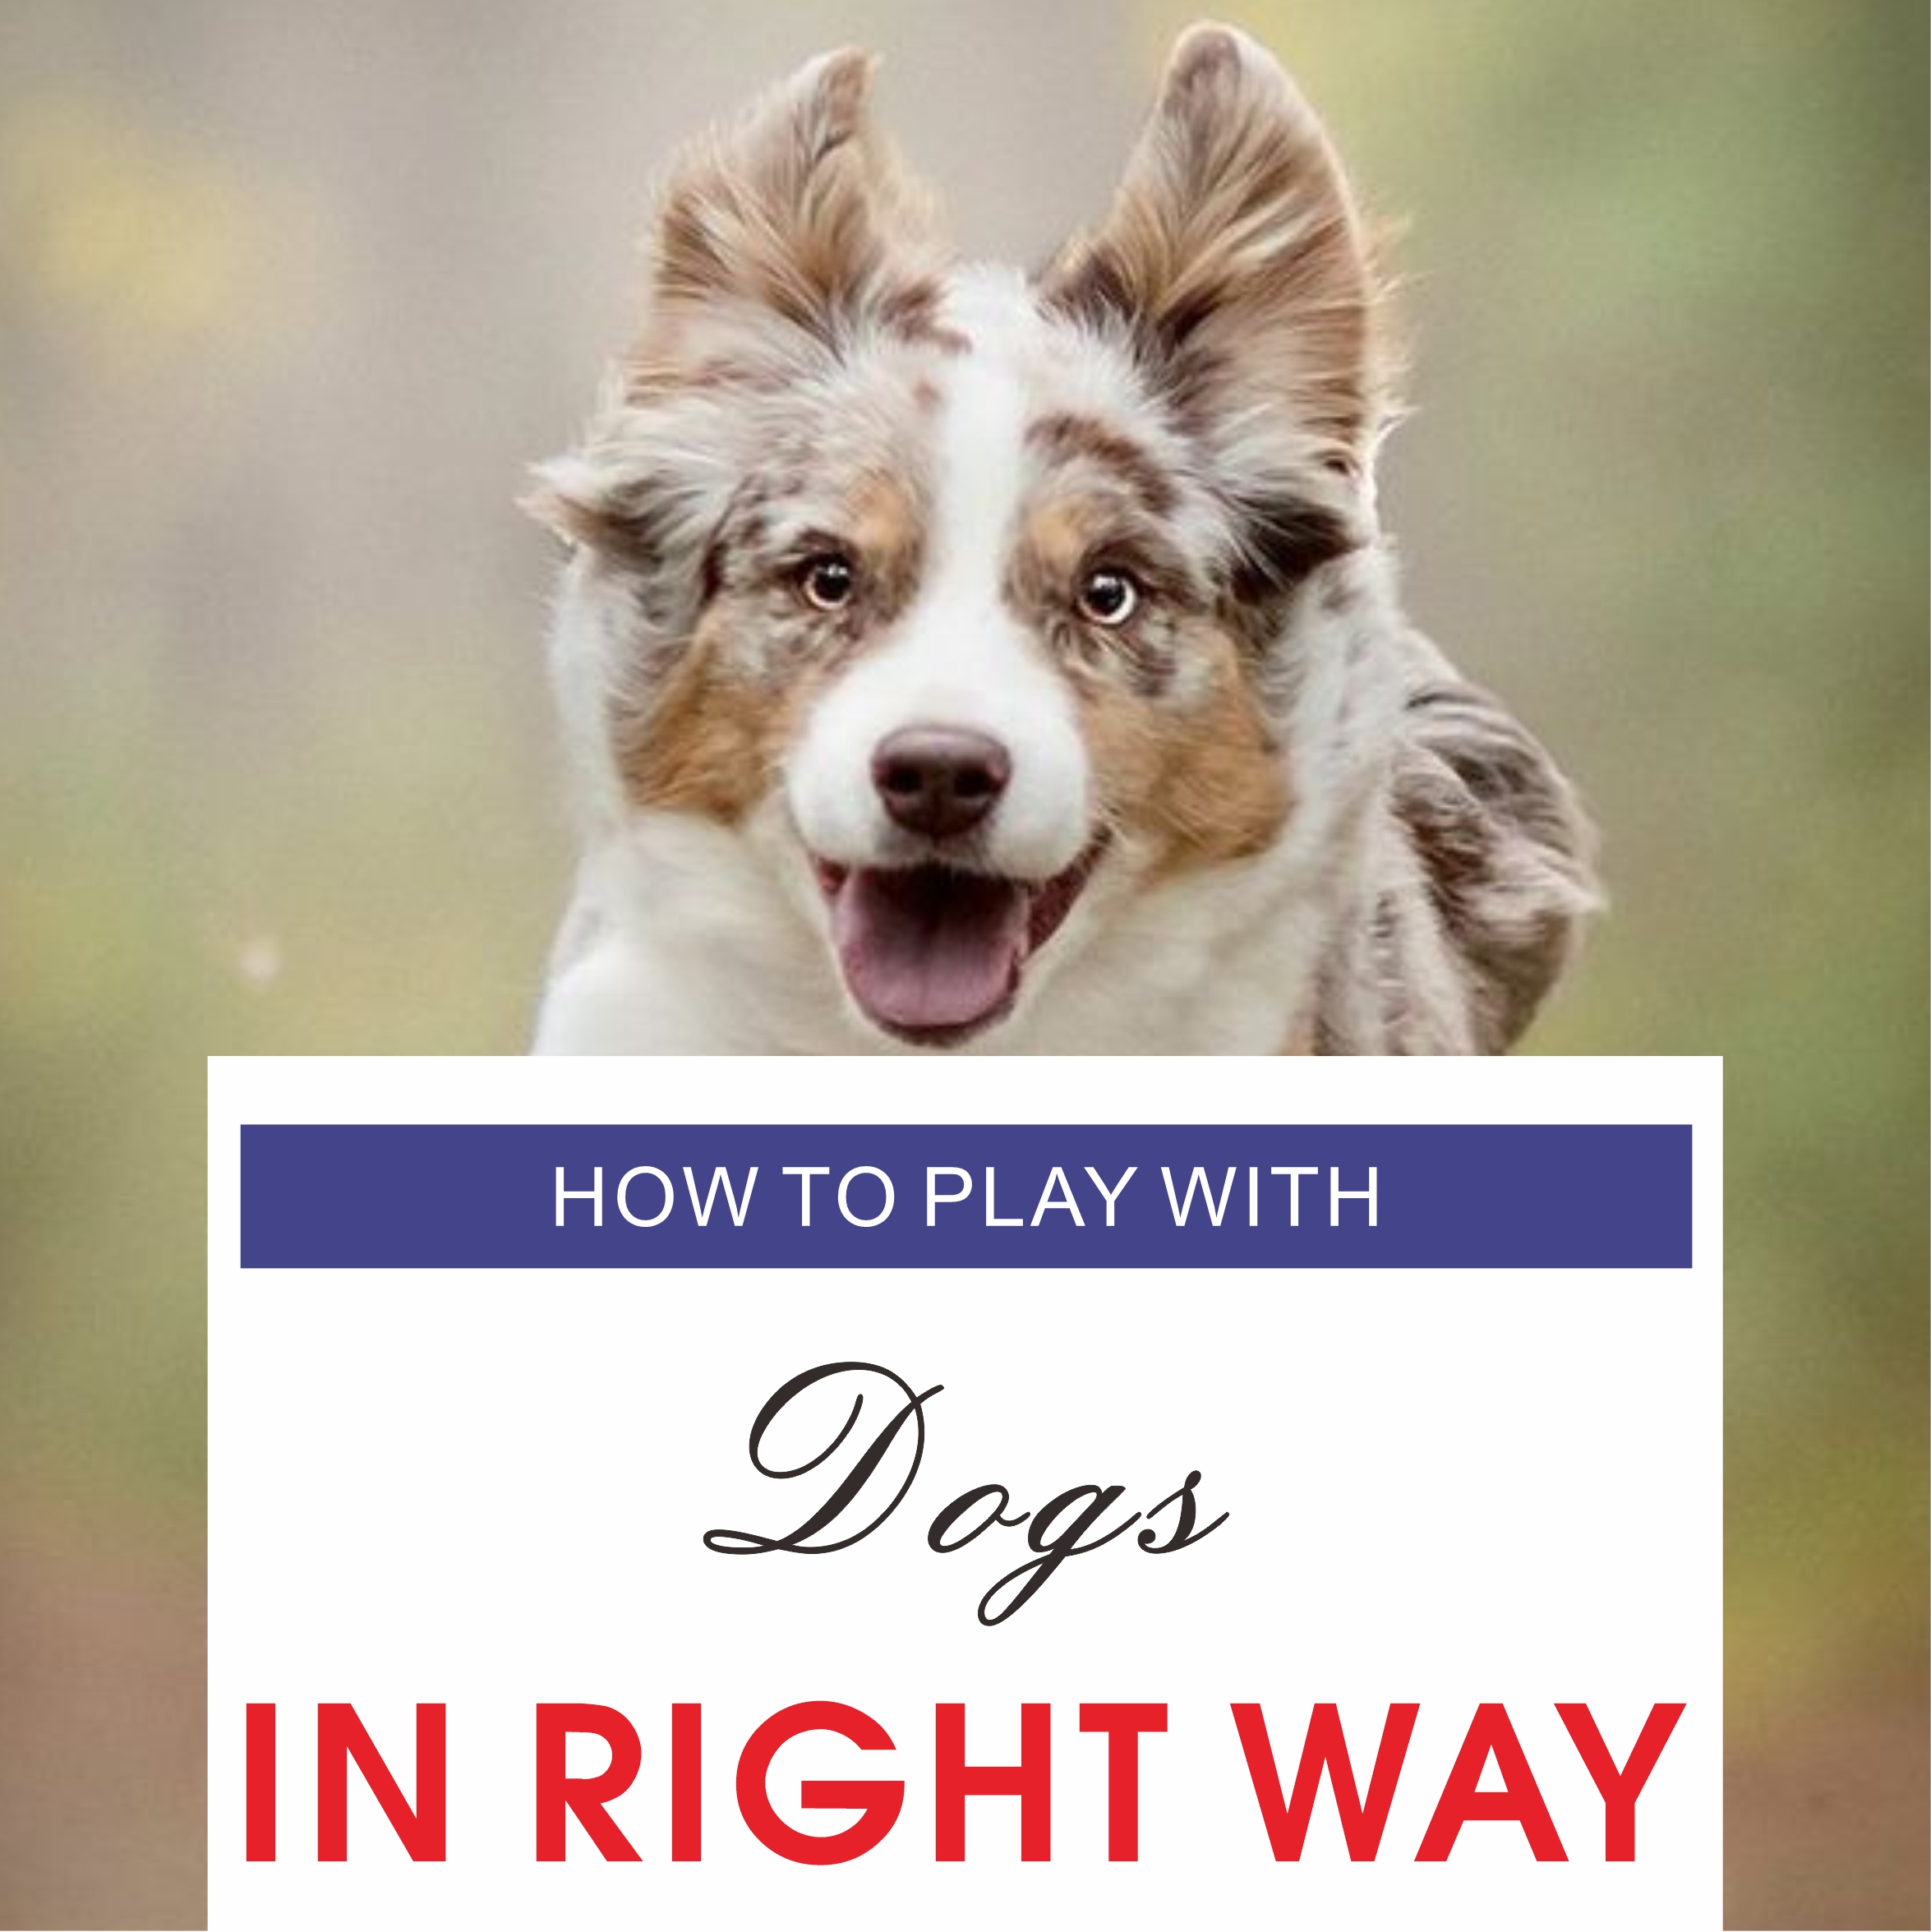 How to play with dogs in the right way